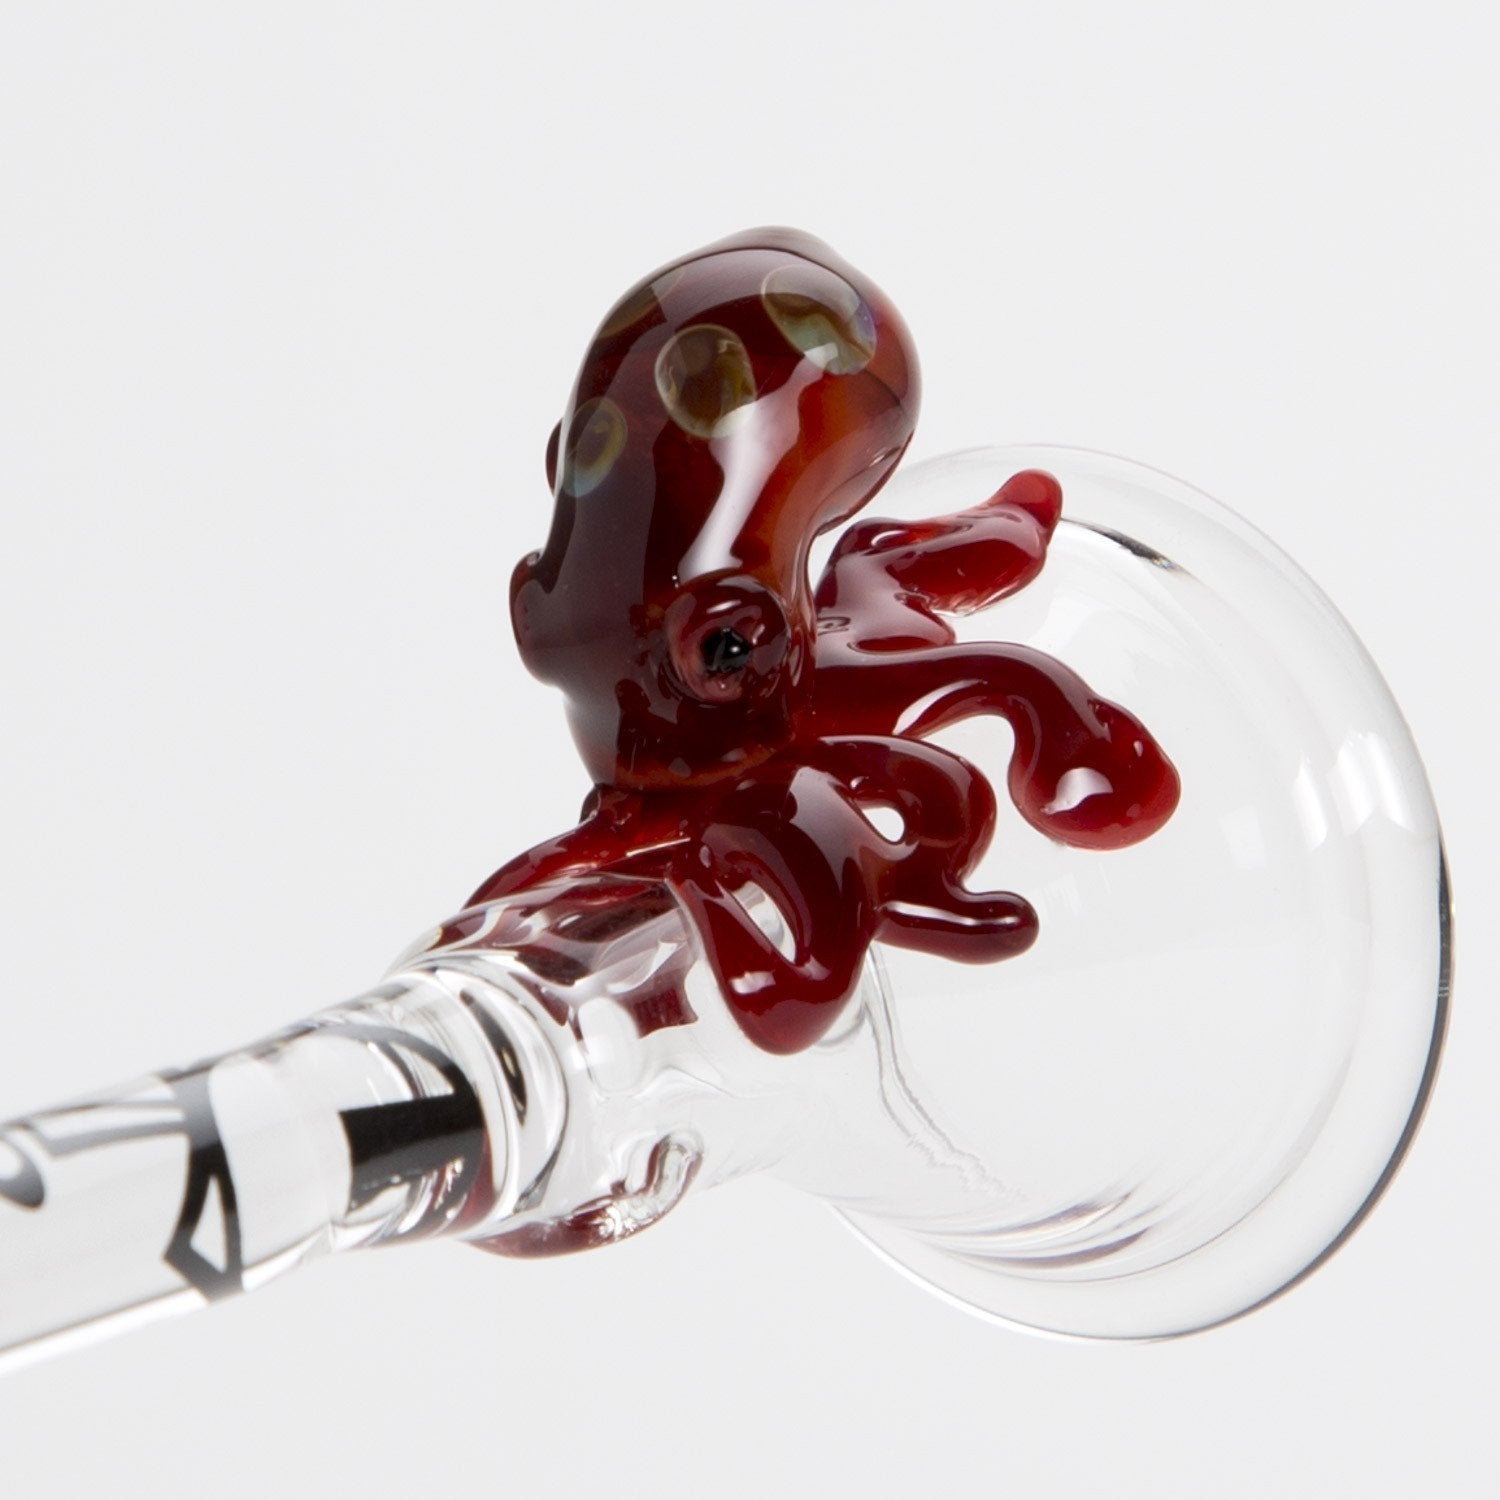 Home Blown Glass Critter Carb Cap Dabber - Octopus - 420 Science - The most trusted online smoke shop.